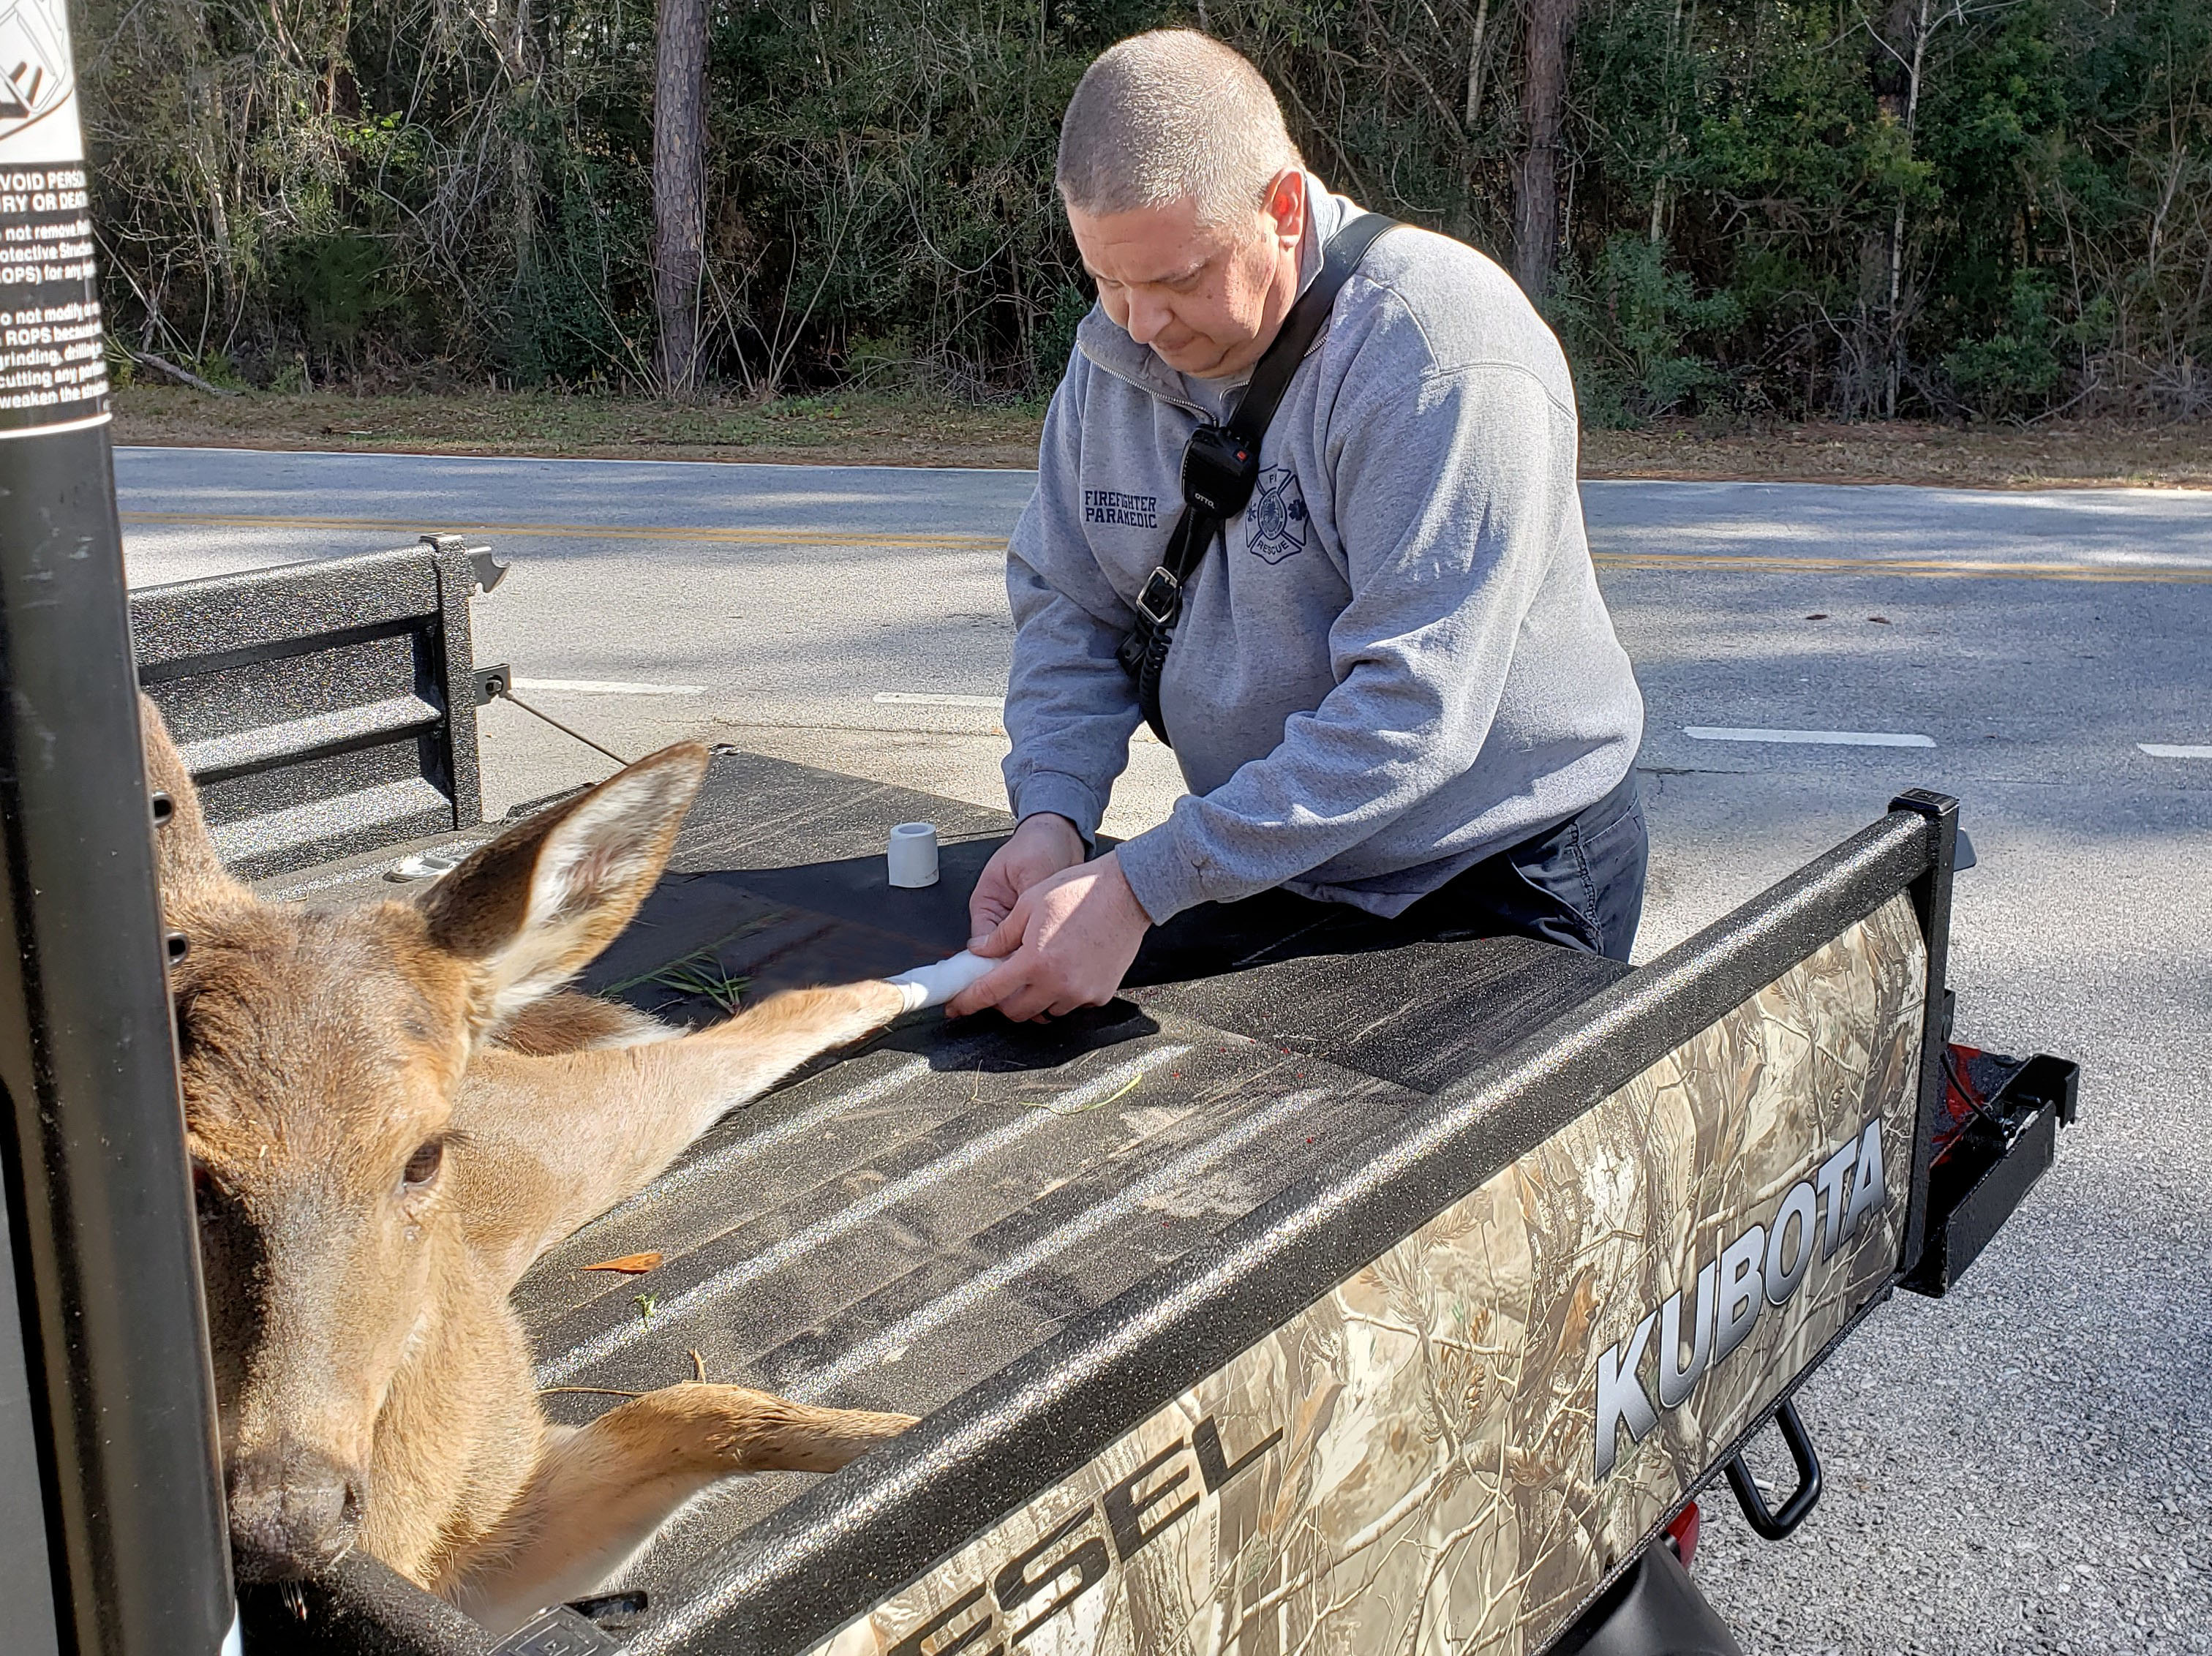 FIREFIGHTERS AND LOCAL BUSINESS OWNER SAVE INJURED DEER